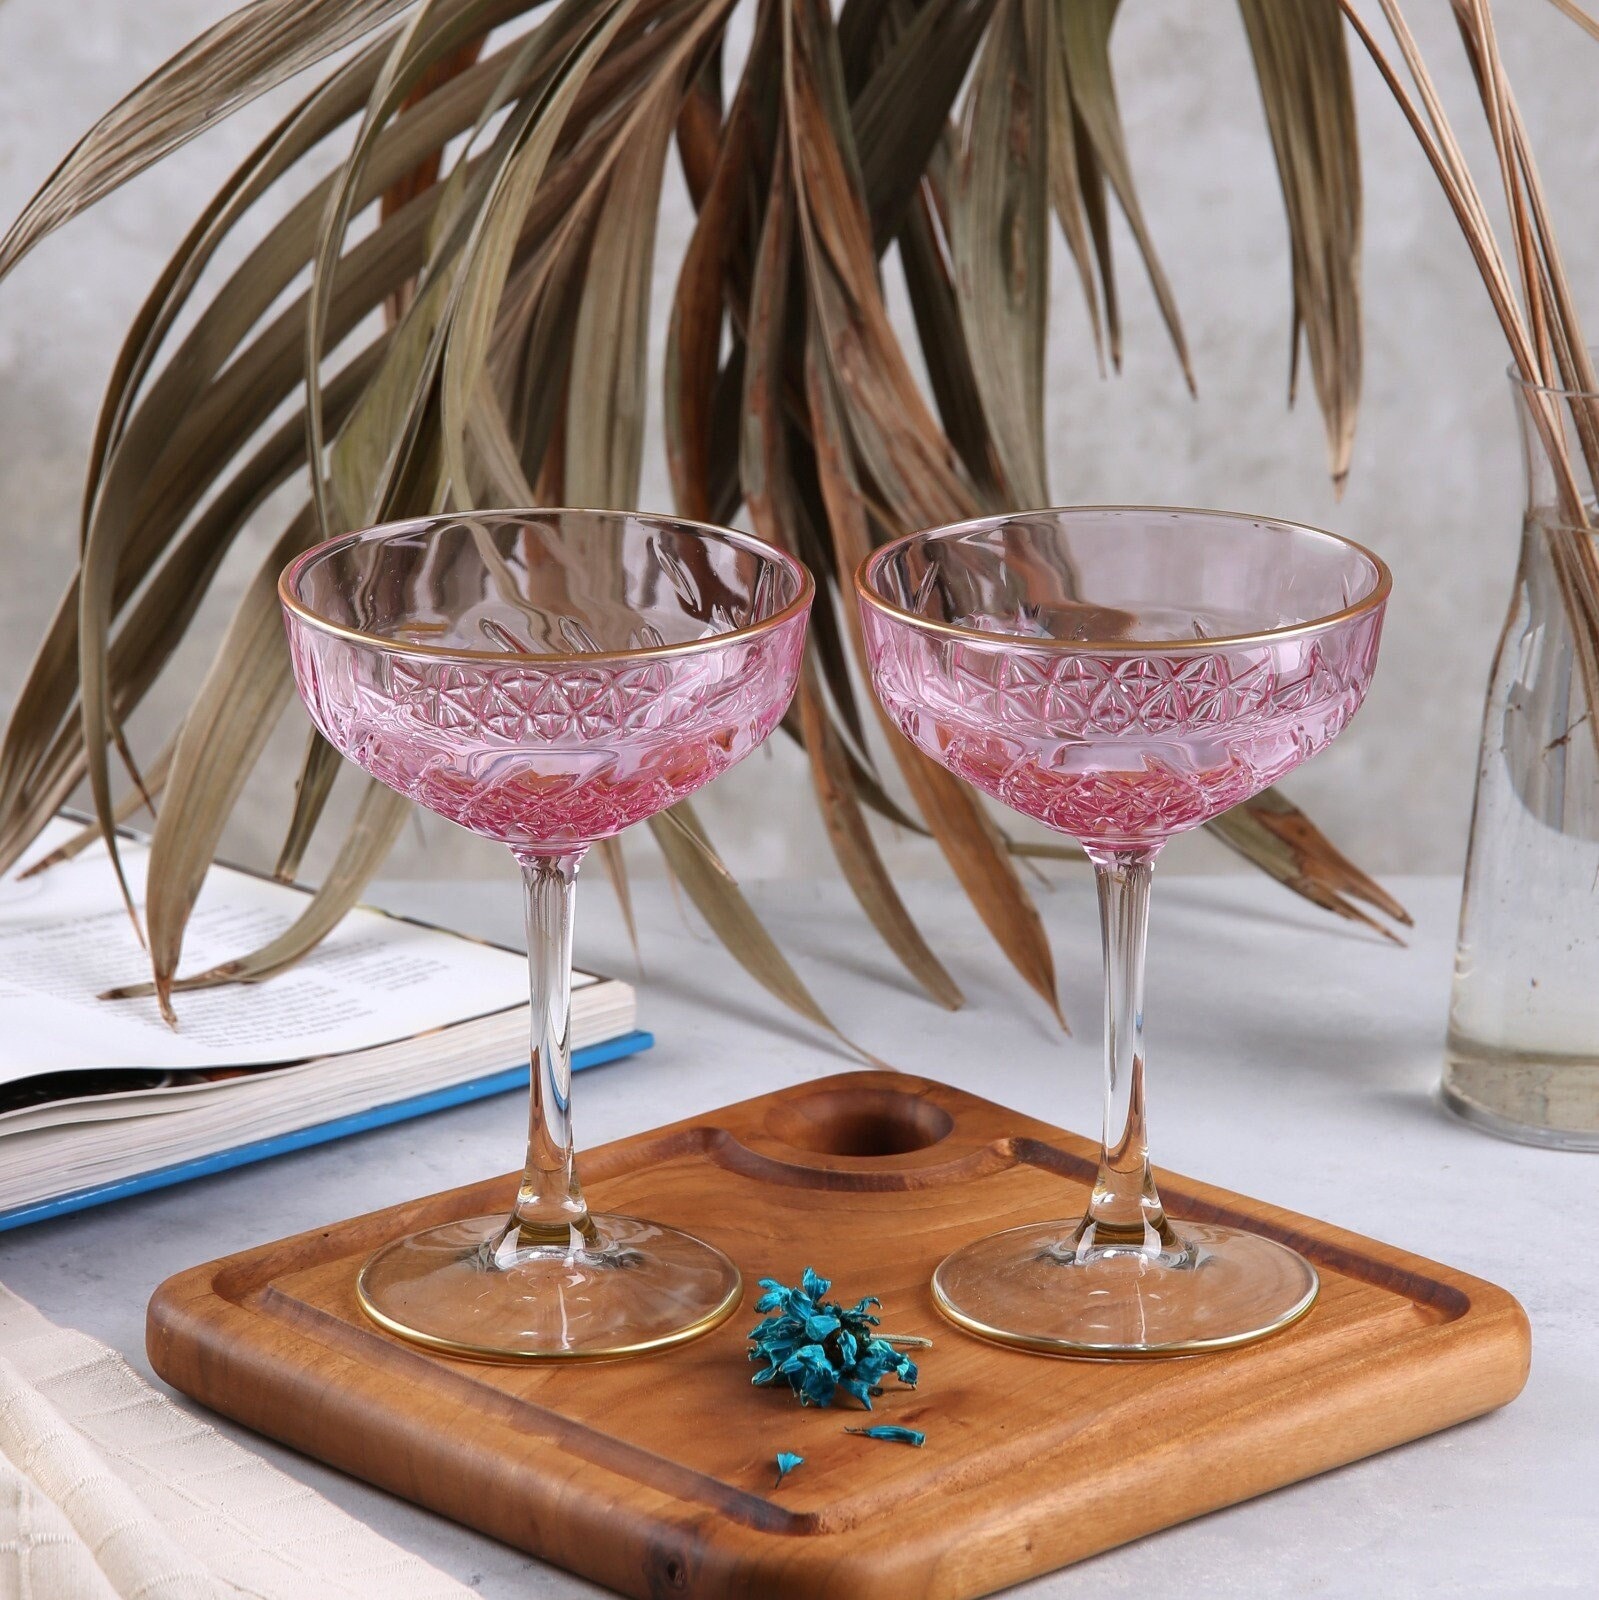 Modern Cocktail Glasses: Coupe Glasses, Old-Fashioned Glasses & More